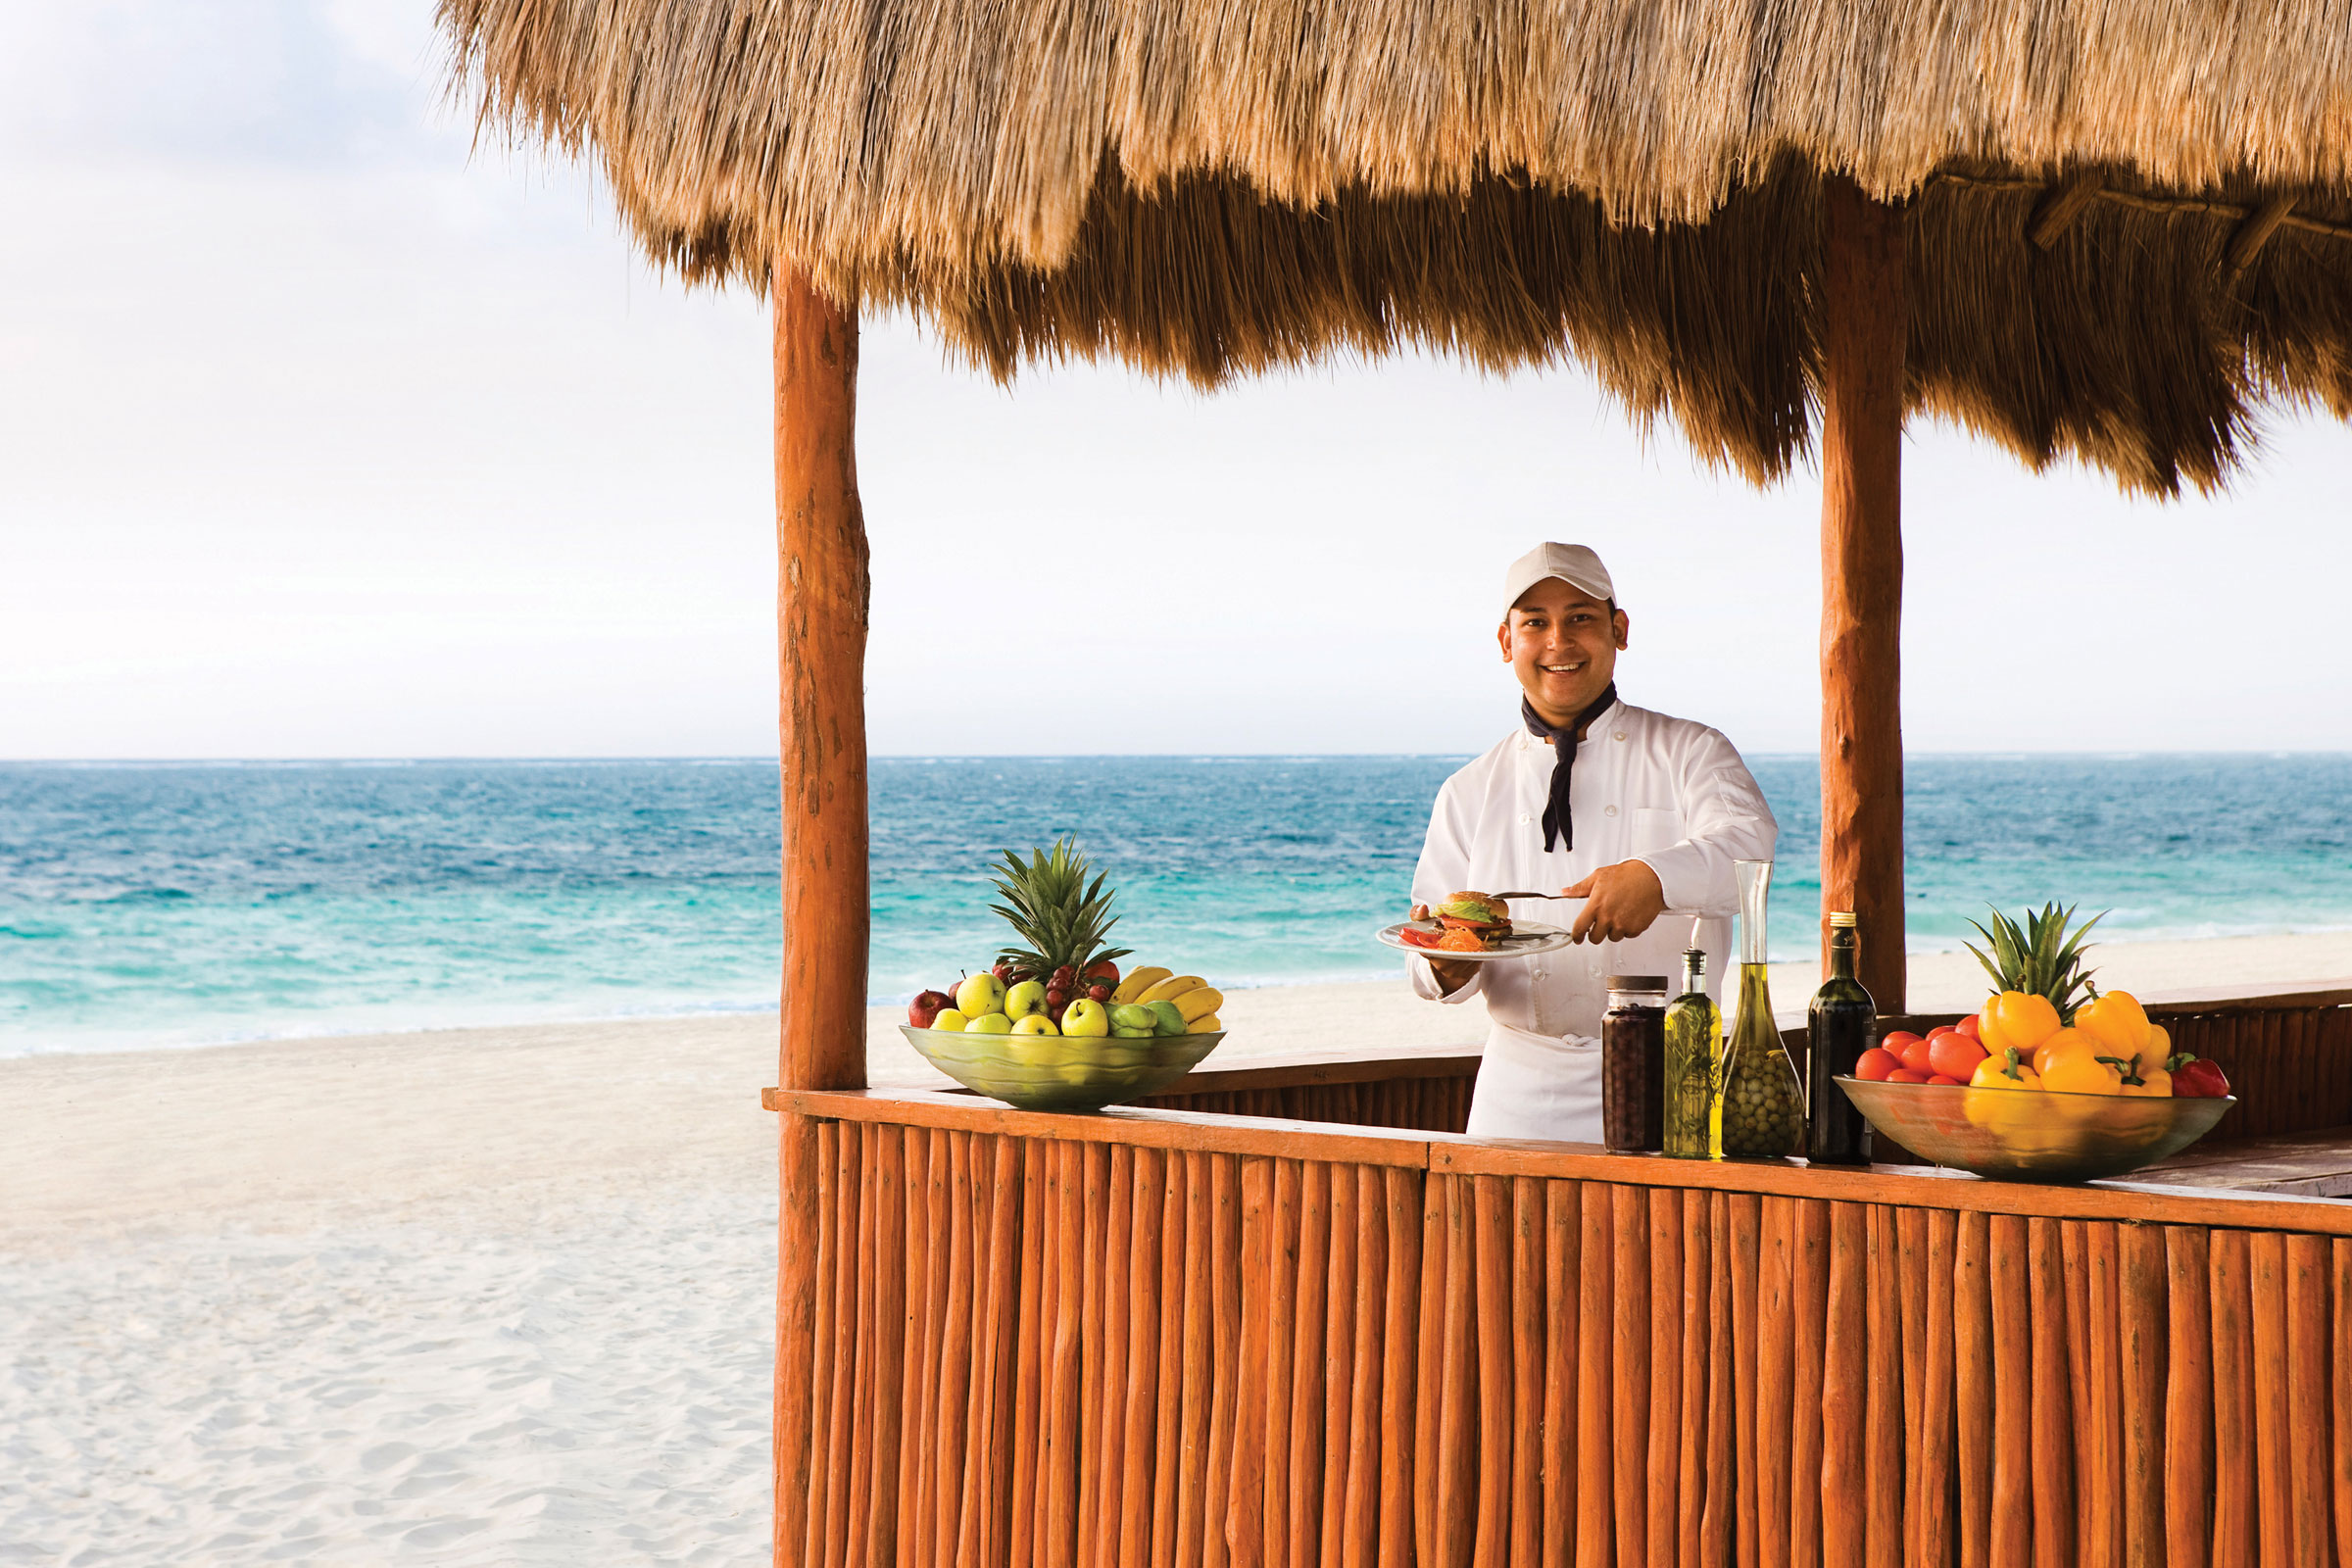 Las Olas Casual Restaurant on the beach at Excellence Playa Mujeres